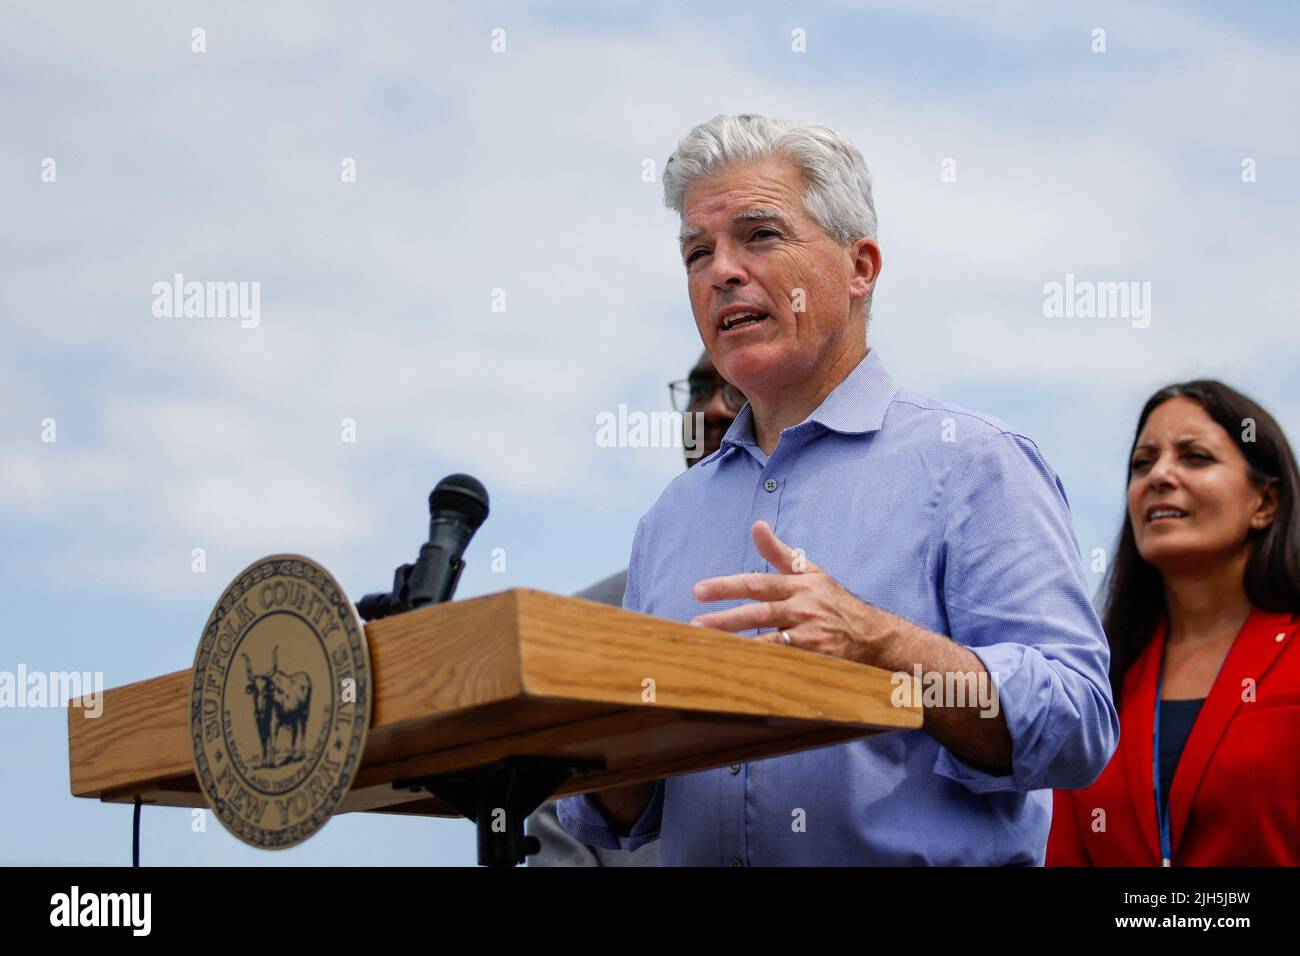 Suffolk County Executive Steve Bellone speaks during a news conference about monkeypox vaccinations in Sayville, New York, U.S., July 15, 2022. REUTERS/Eduardo Munoz Stock Photo